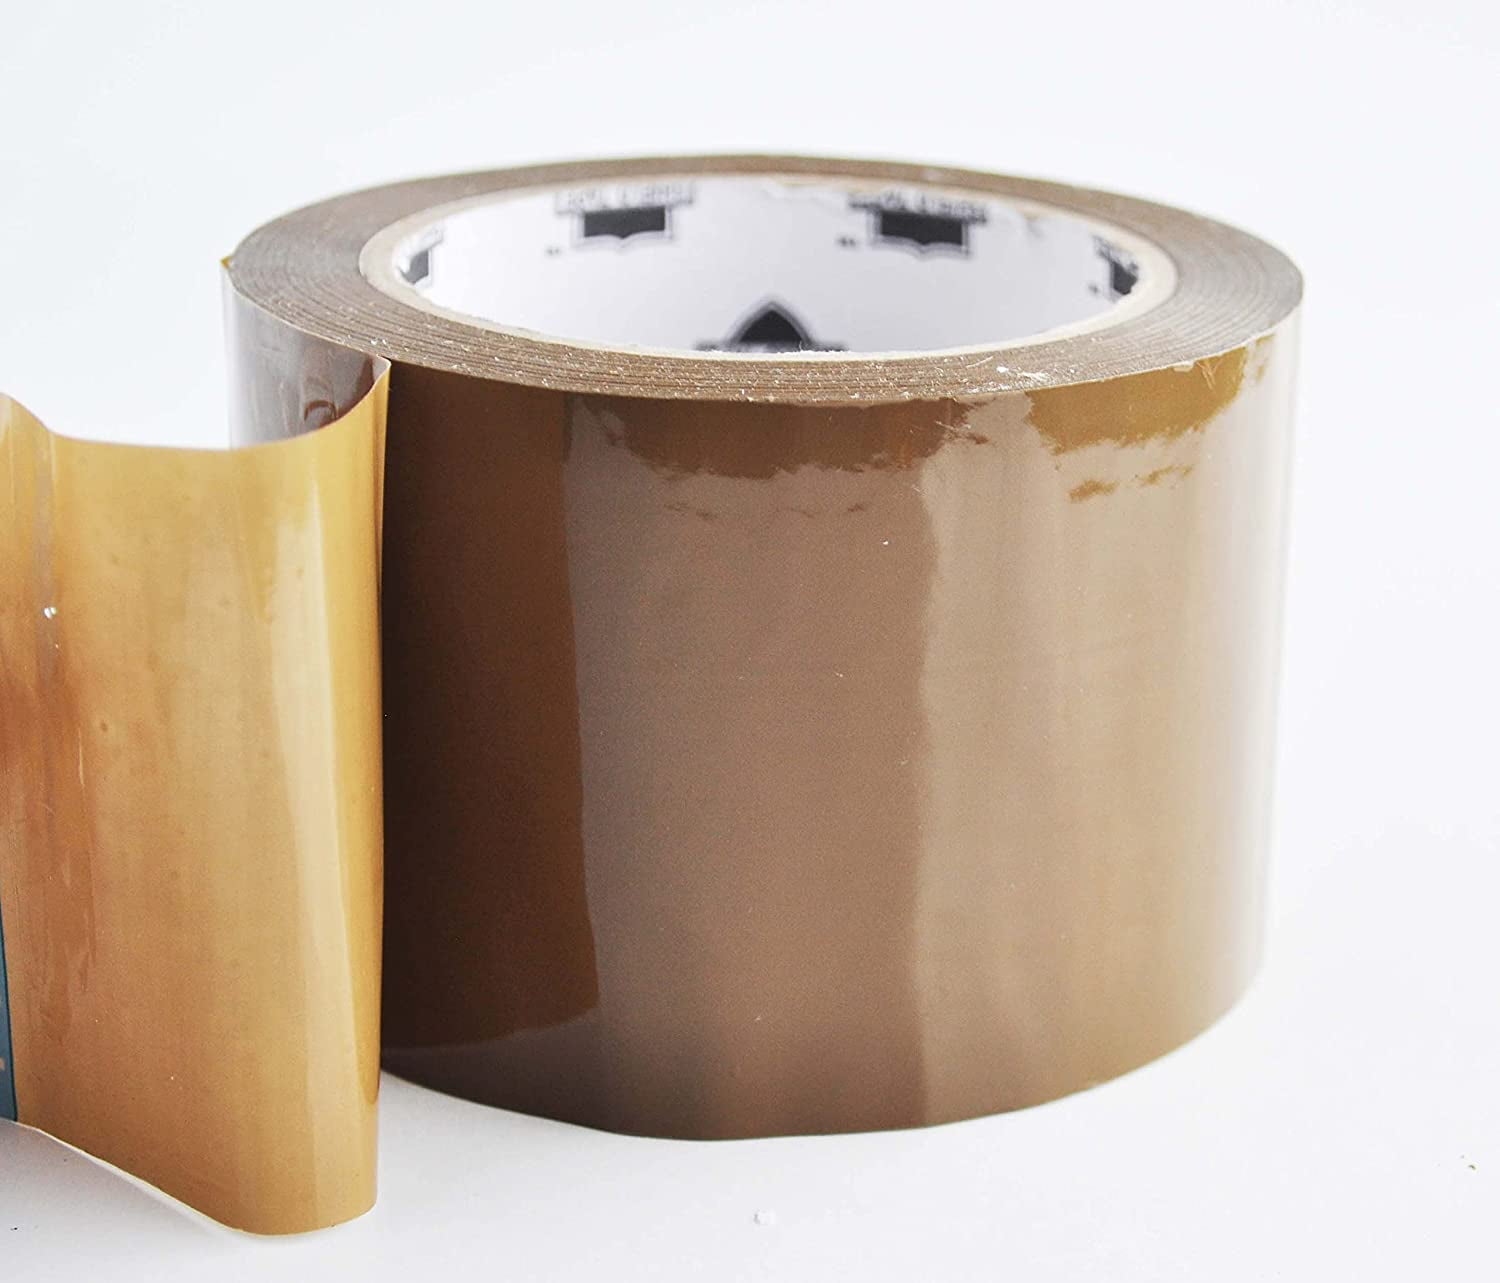 Electriduct 3 Inch Brown Packing Tape - 1.77 mil Strong Heavy Duty  Industrial Grade Shipping Tape (4 Rolls)